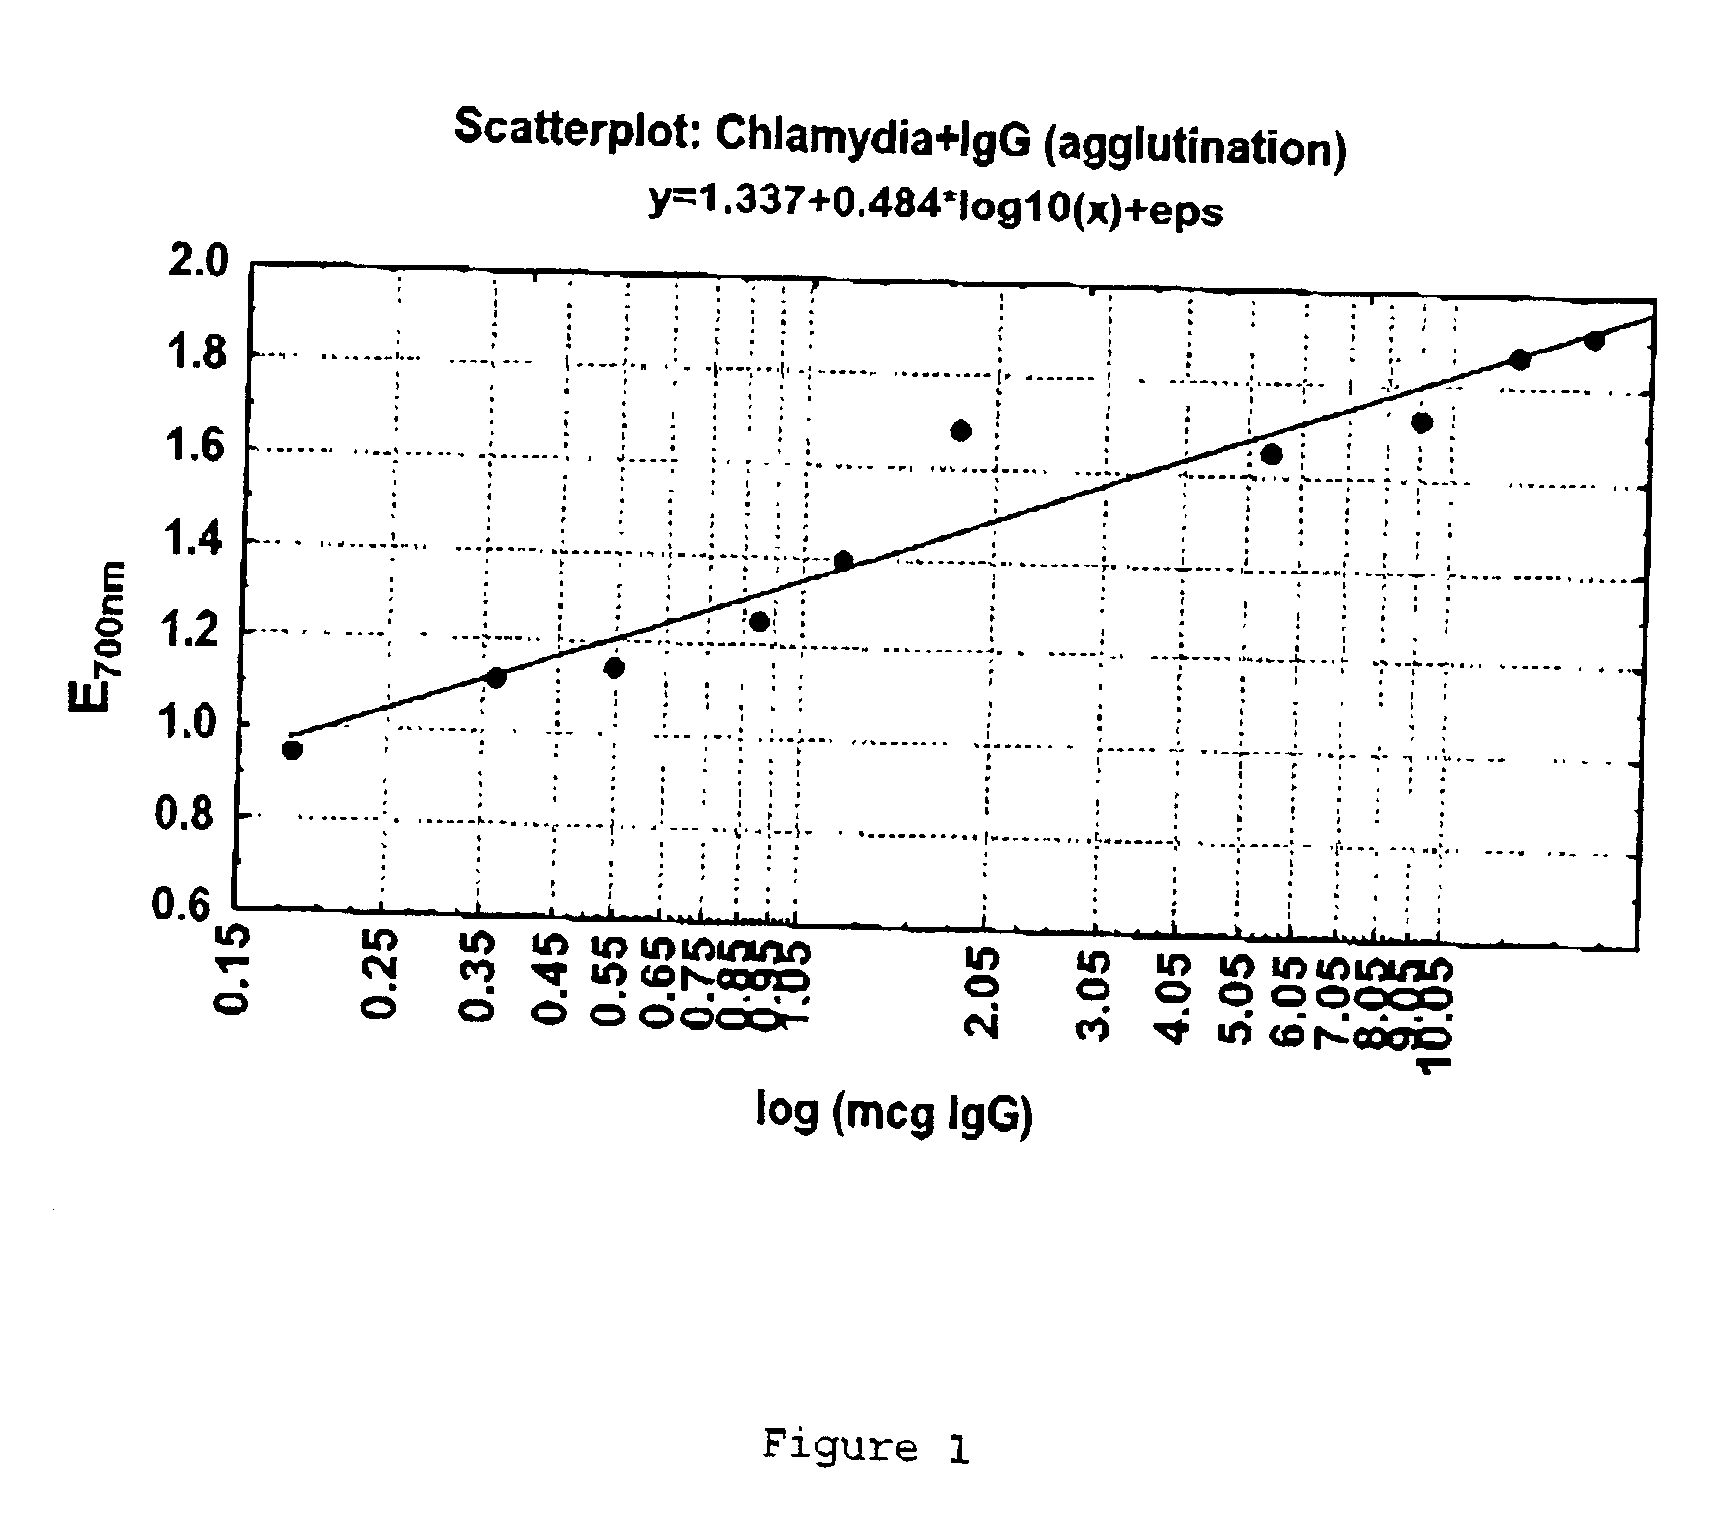 Methods relating to treatment of atheroaclerosis